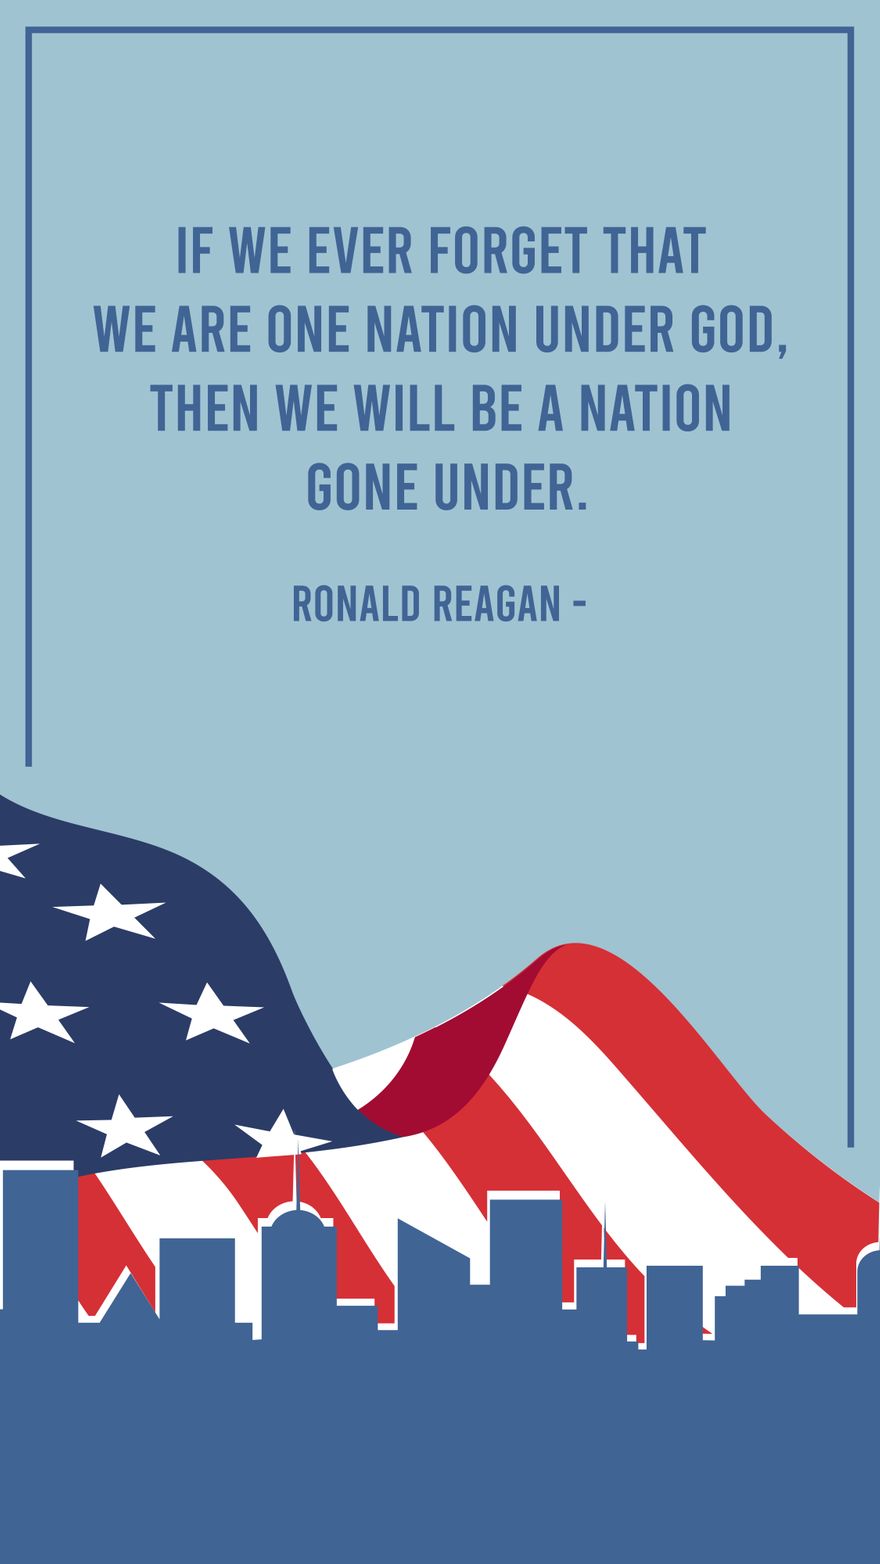 Free Ronald Reagan - If we ever forget that we are One Nation Under God, then we will be a nation gone under. in JPG